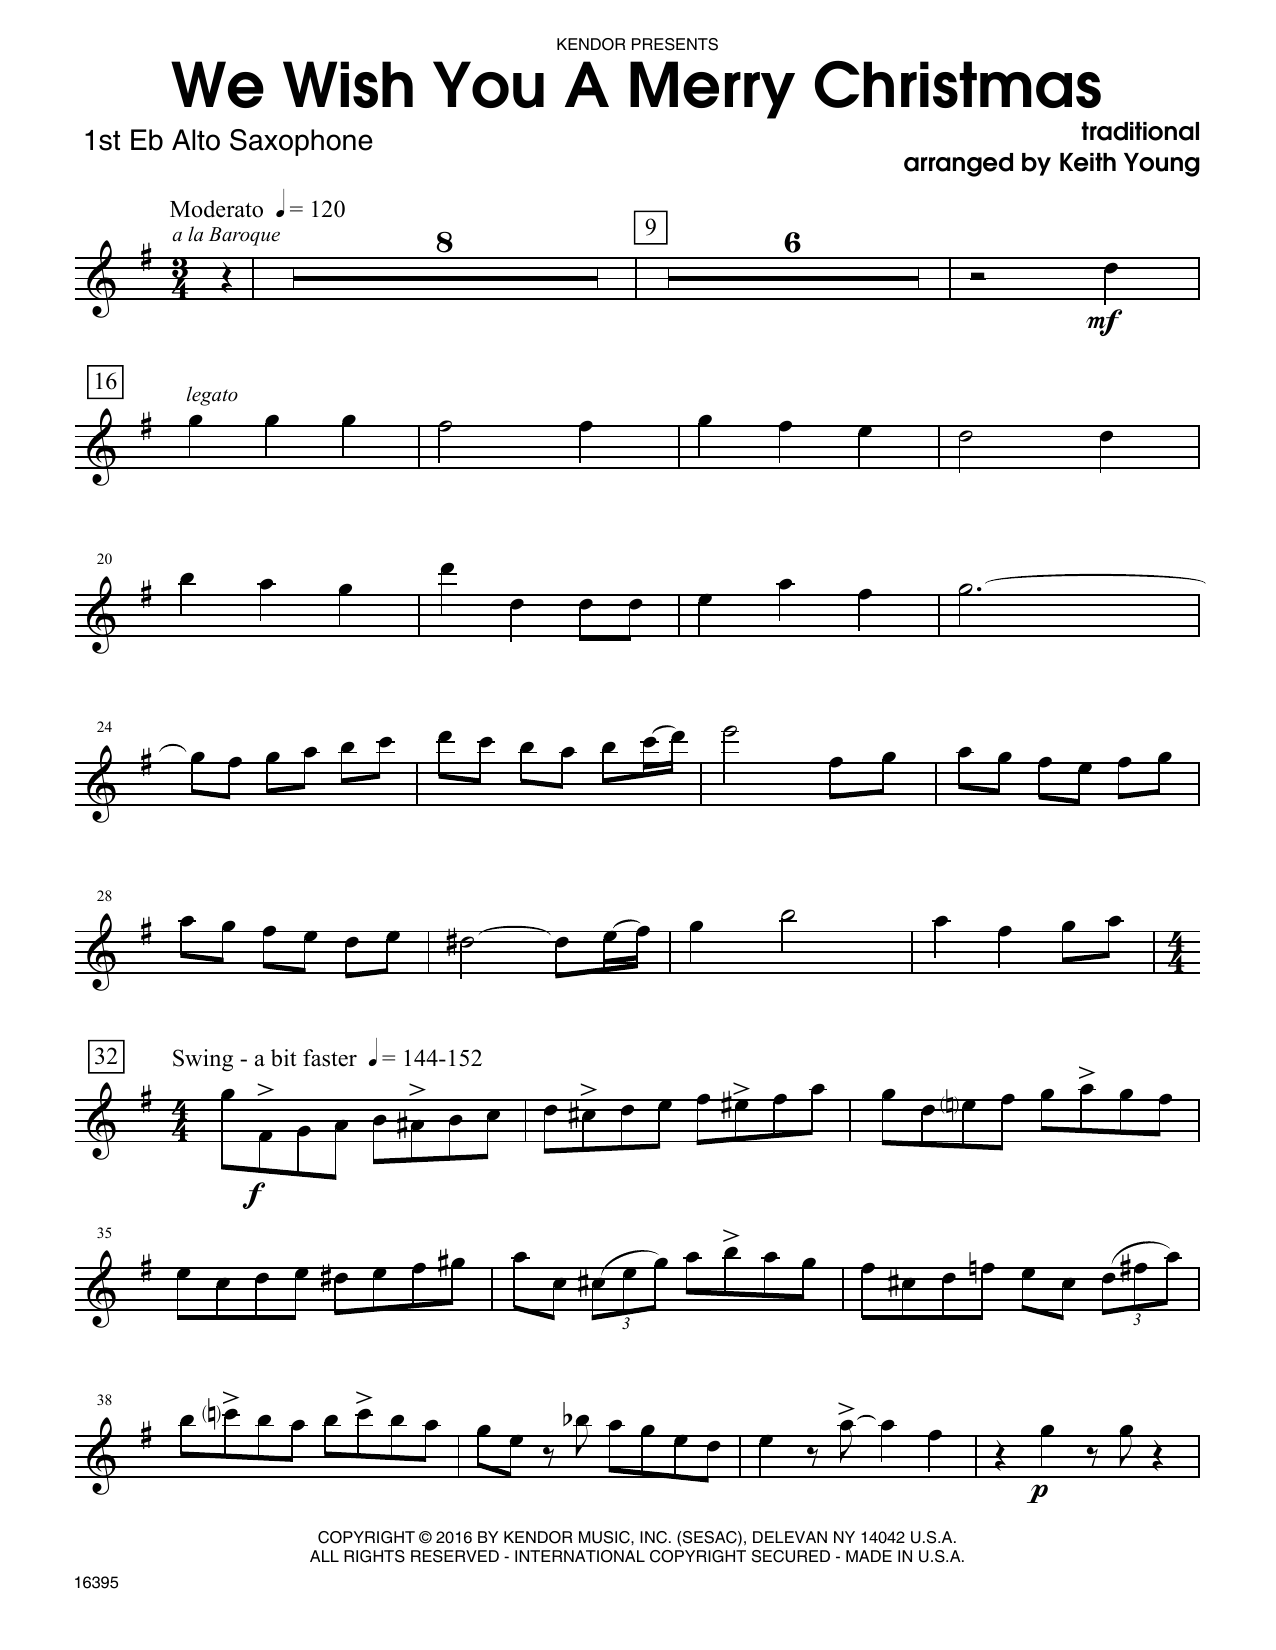 Download Keith Young We Wish You A Merry Christmas - 1st Eb Sheet Music